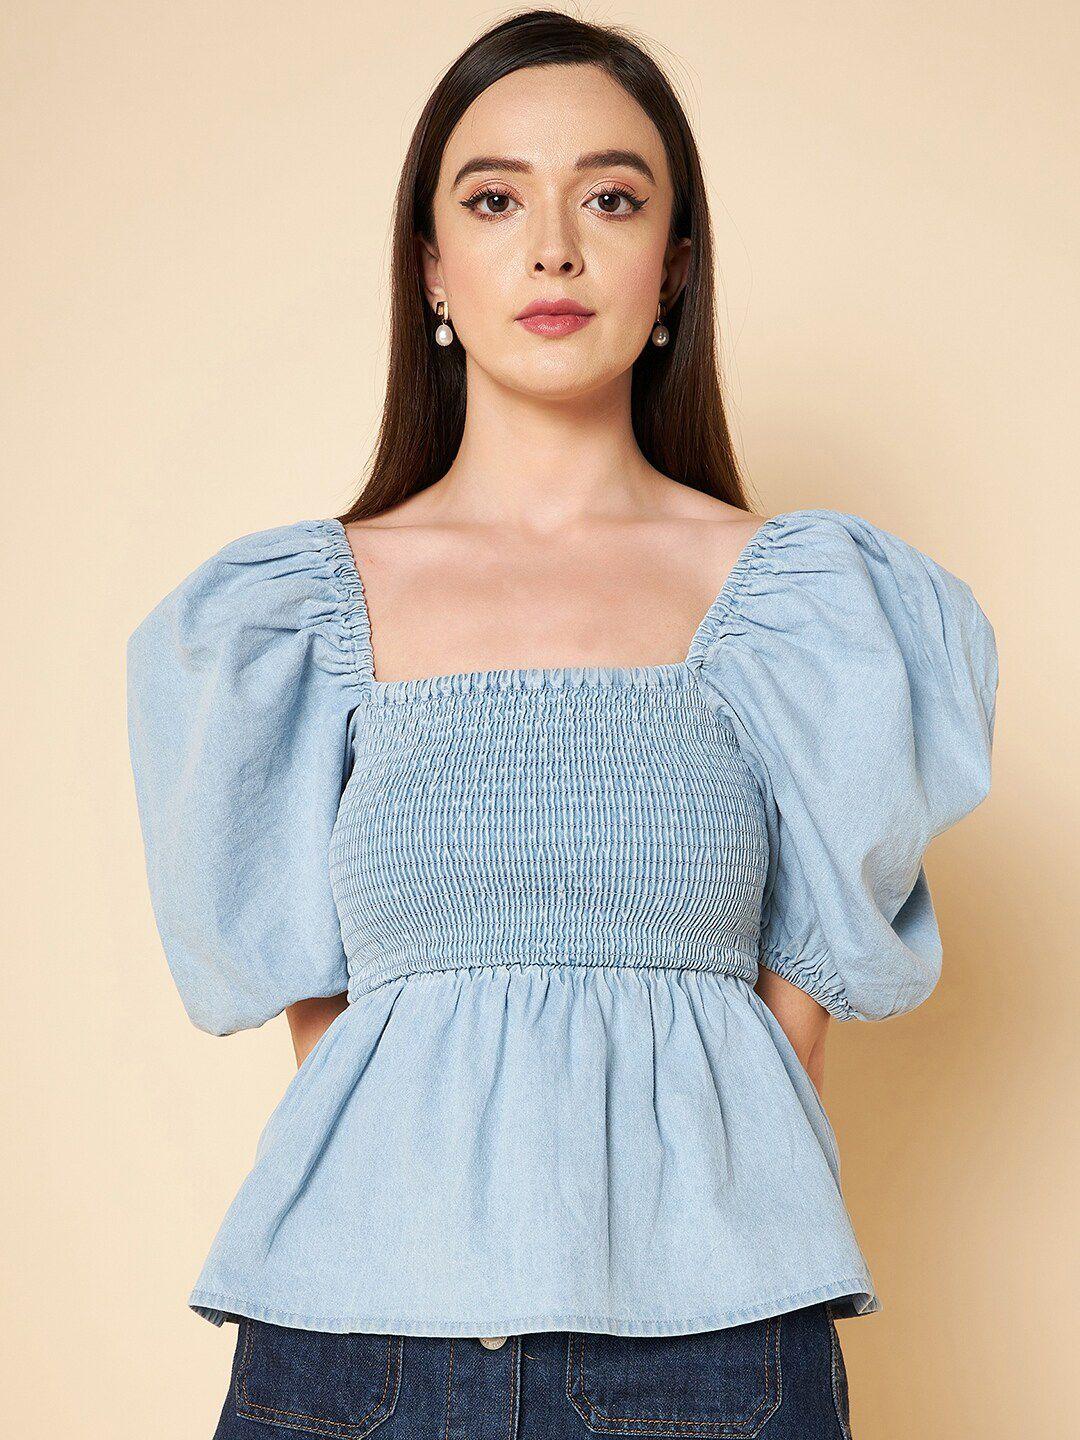 high star square neck puff sleeves smocked pure cotton peplum top